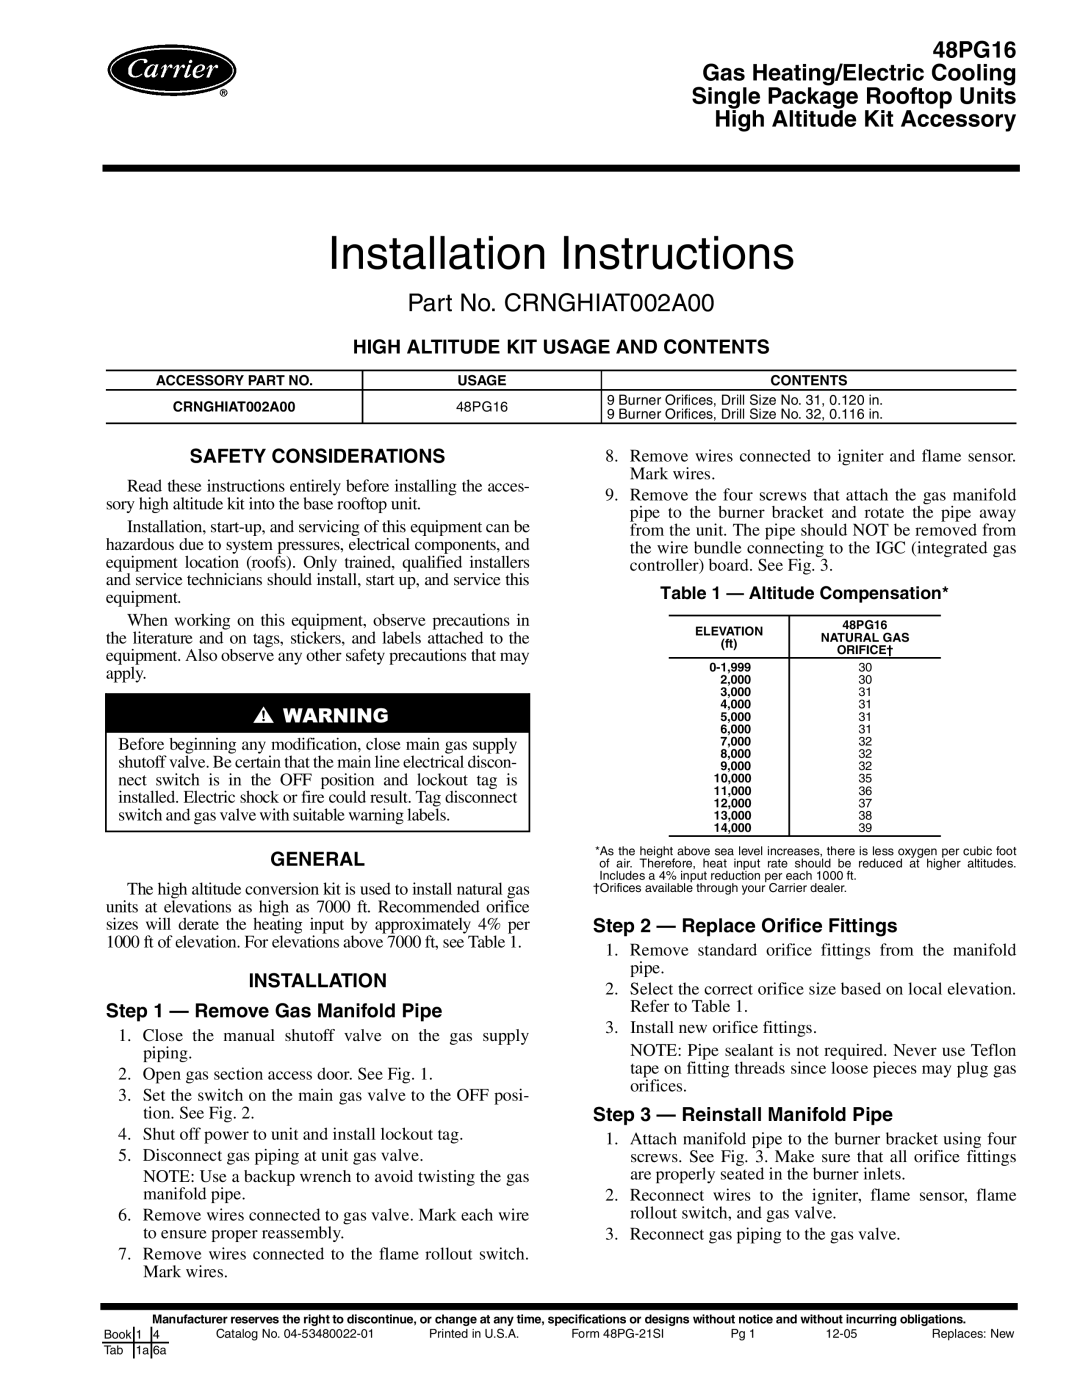 Carrier 48PG16 installation instructions High Altitude Kit Usage And Contents, Safety Considerations, General 